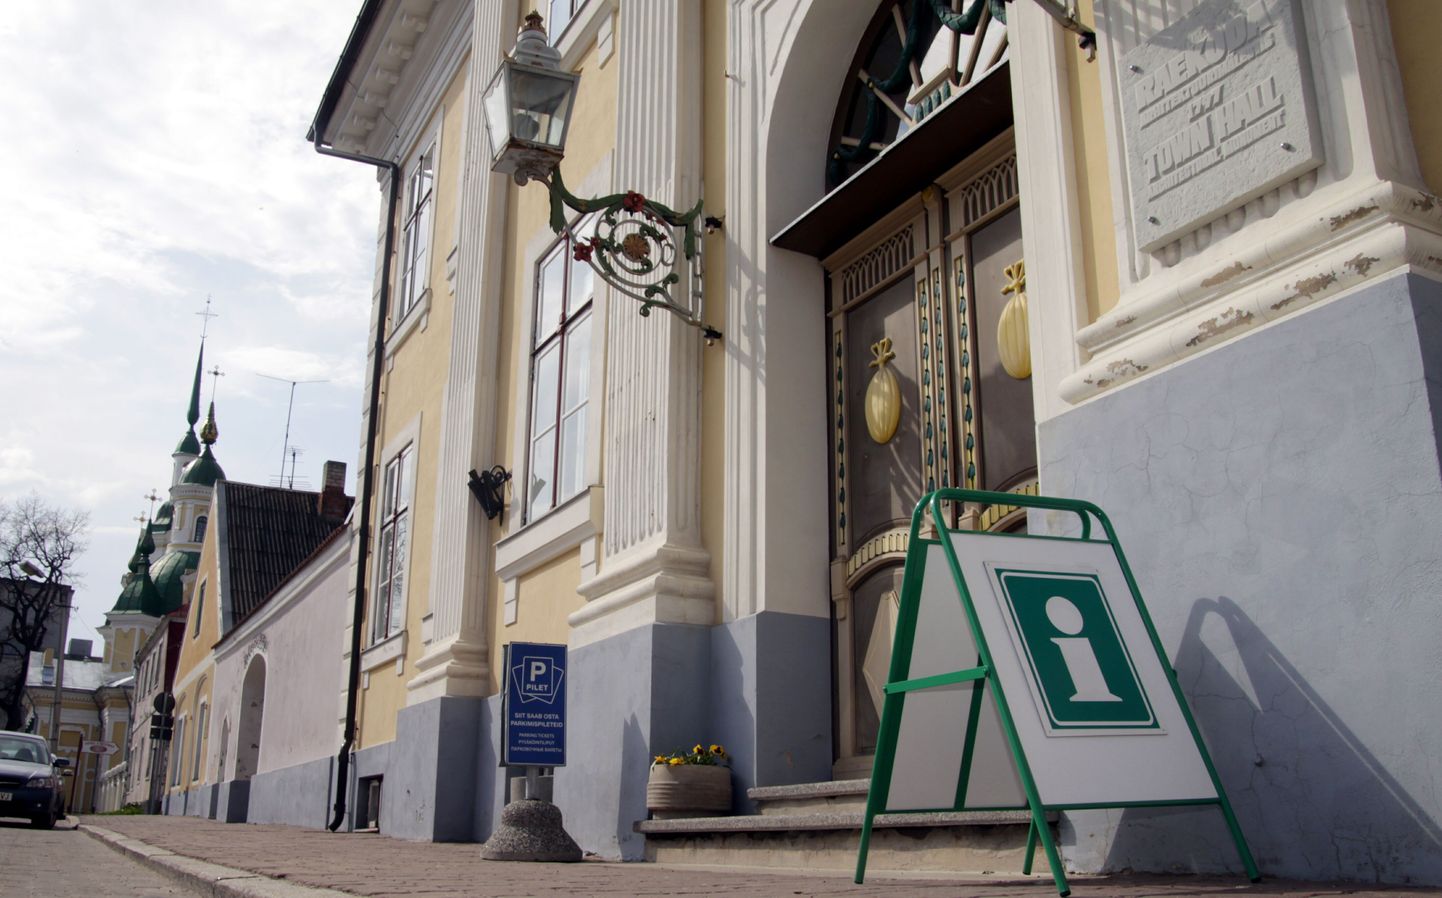 The West-Estonia Visitors Centre was opened in the historical Pärnu Town Hall (Uus 4), which is the first regional visitors’ centre in Estonia.